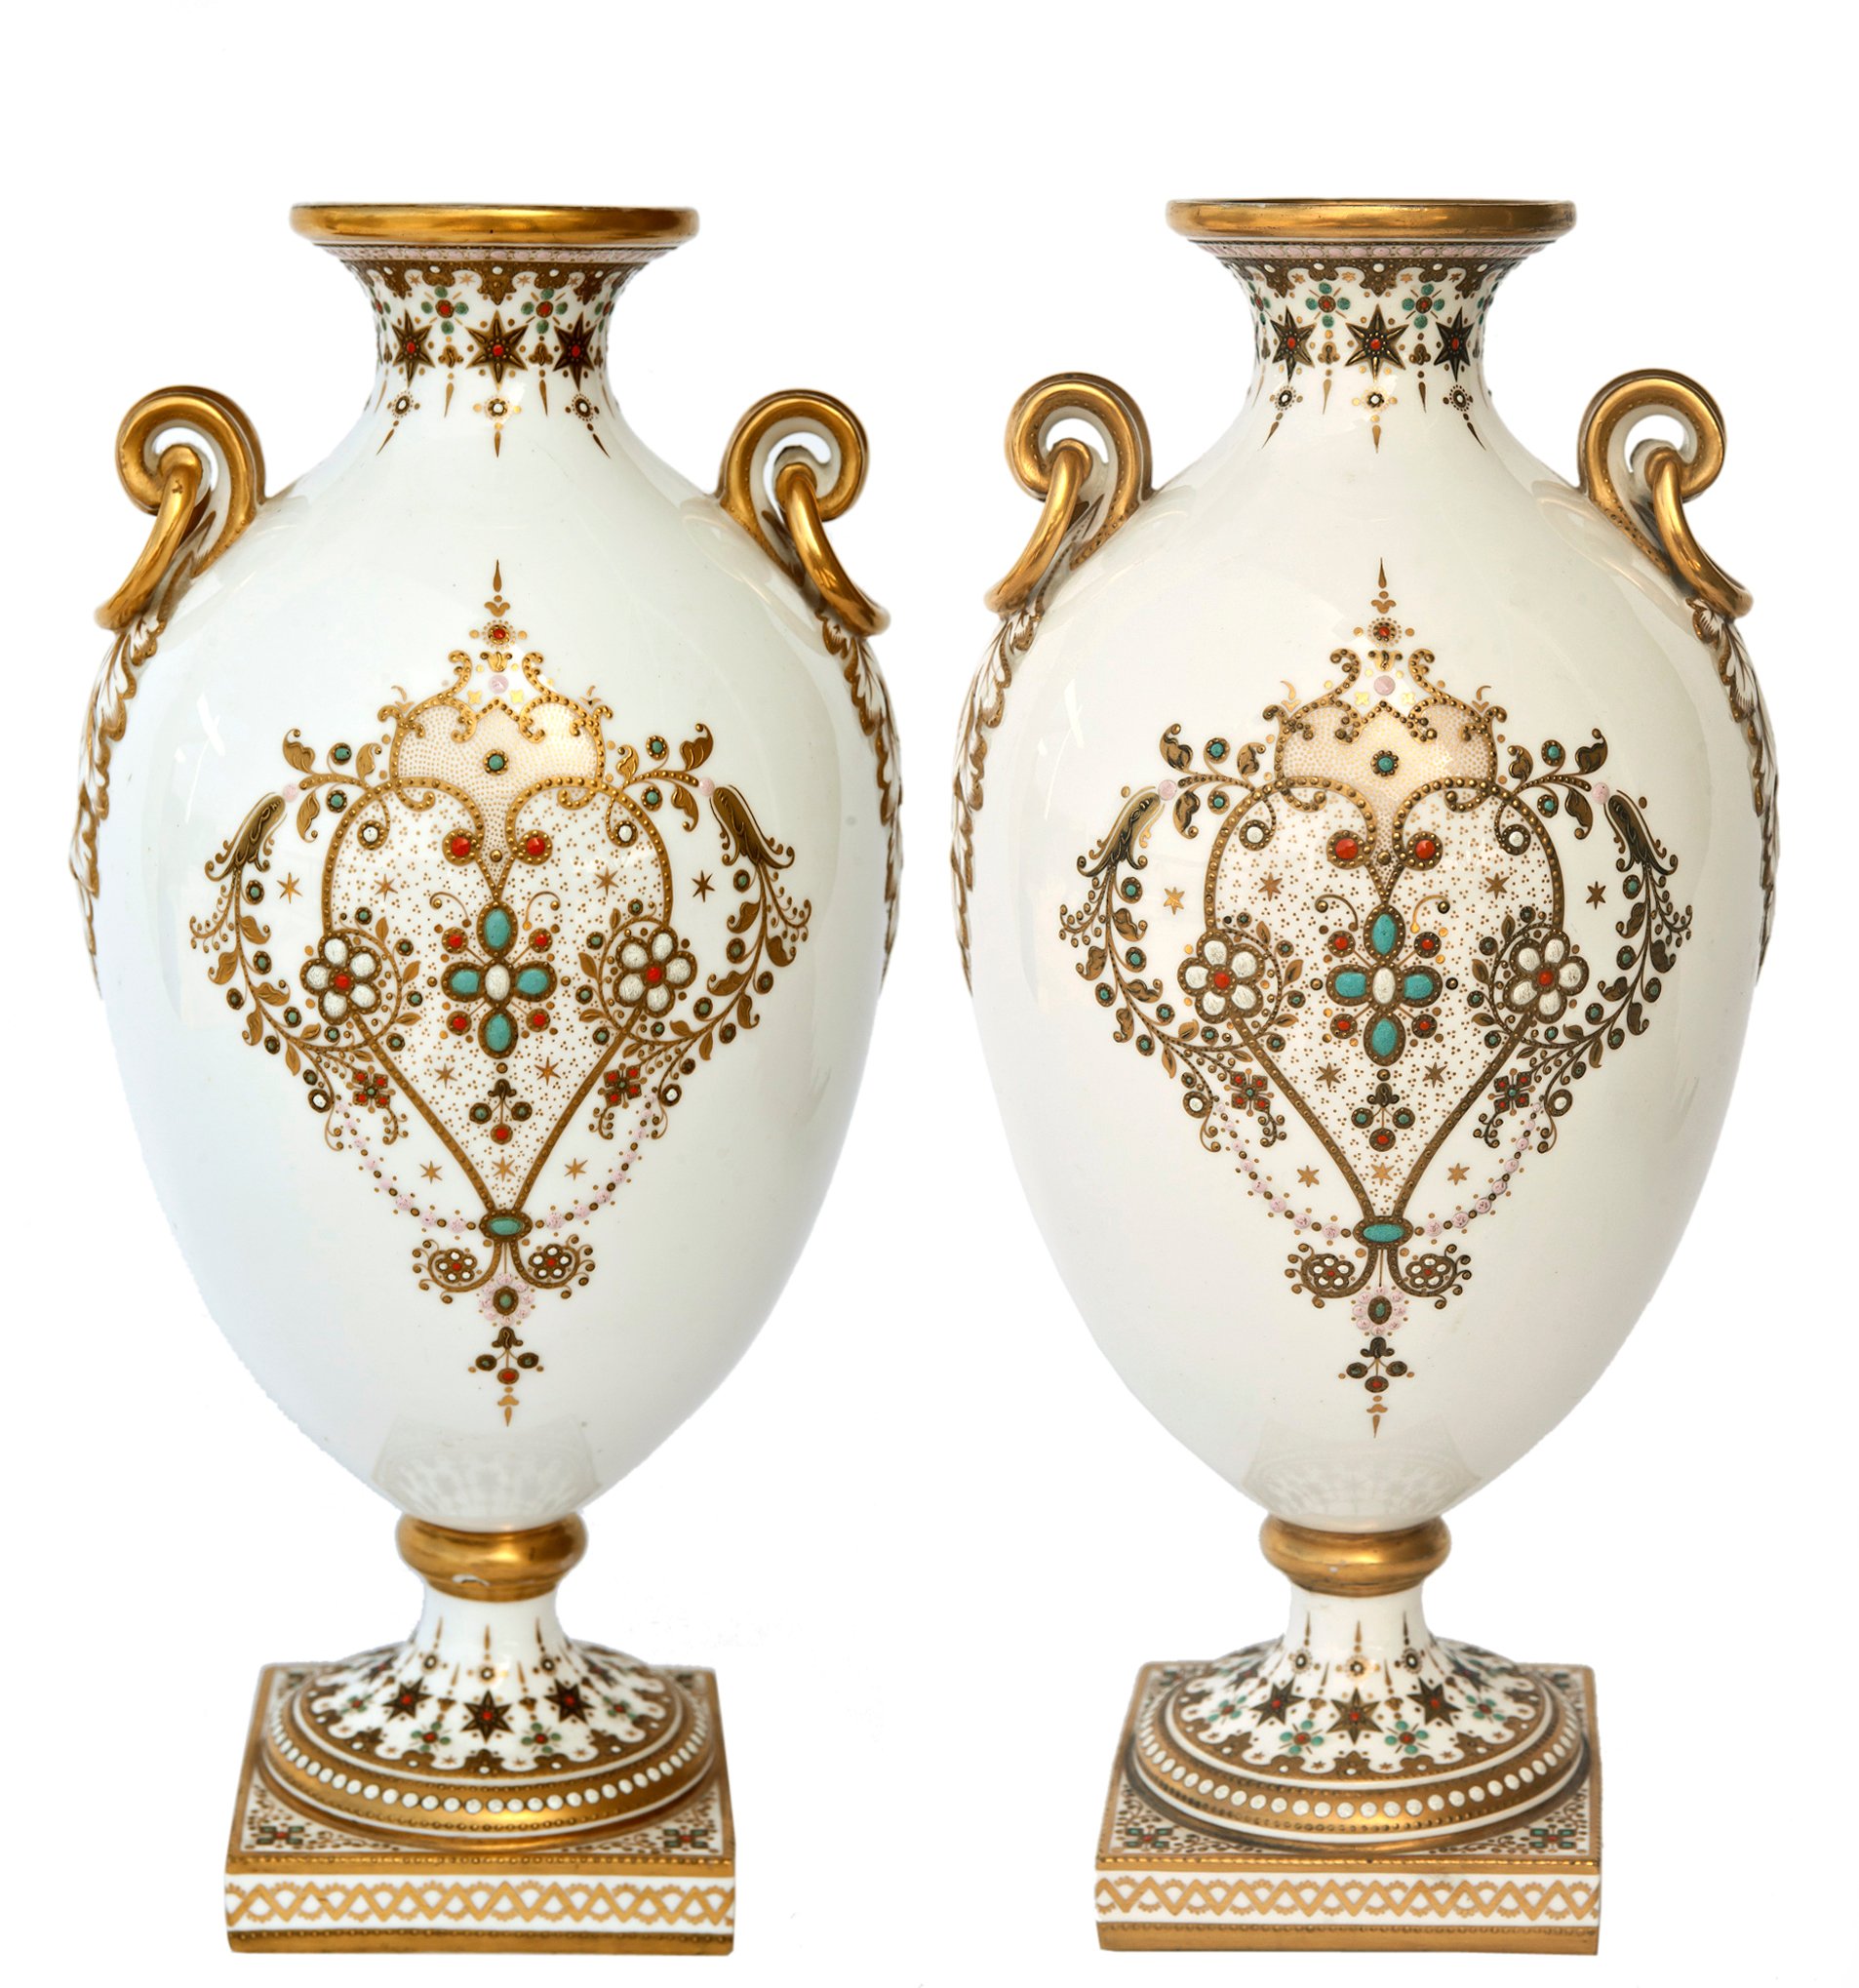 Neoclassical Style Euro Porcelain Urns~P77631194